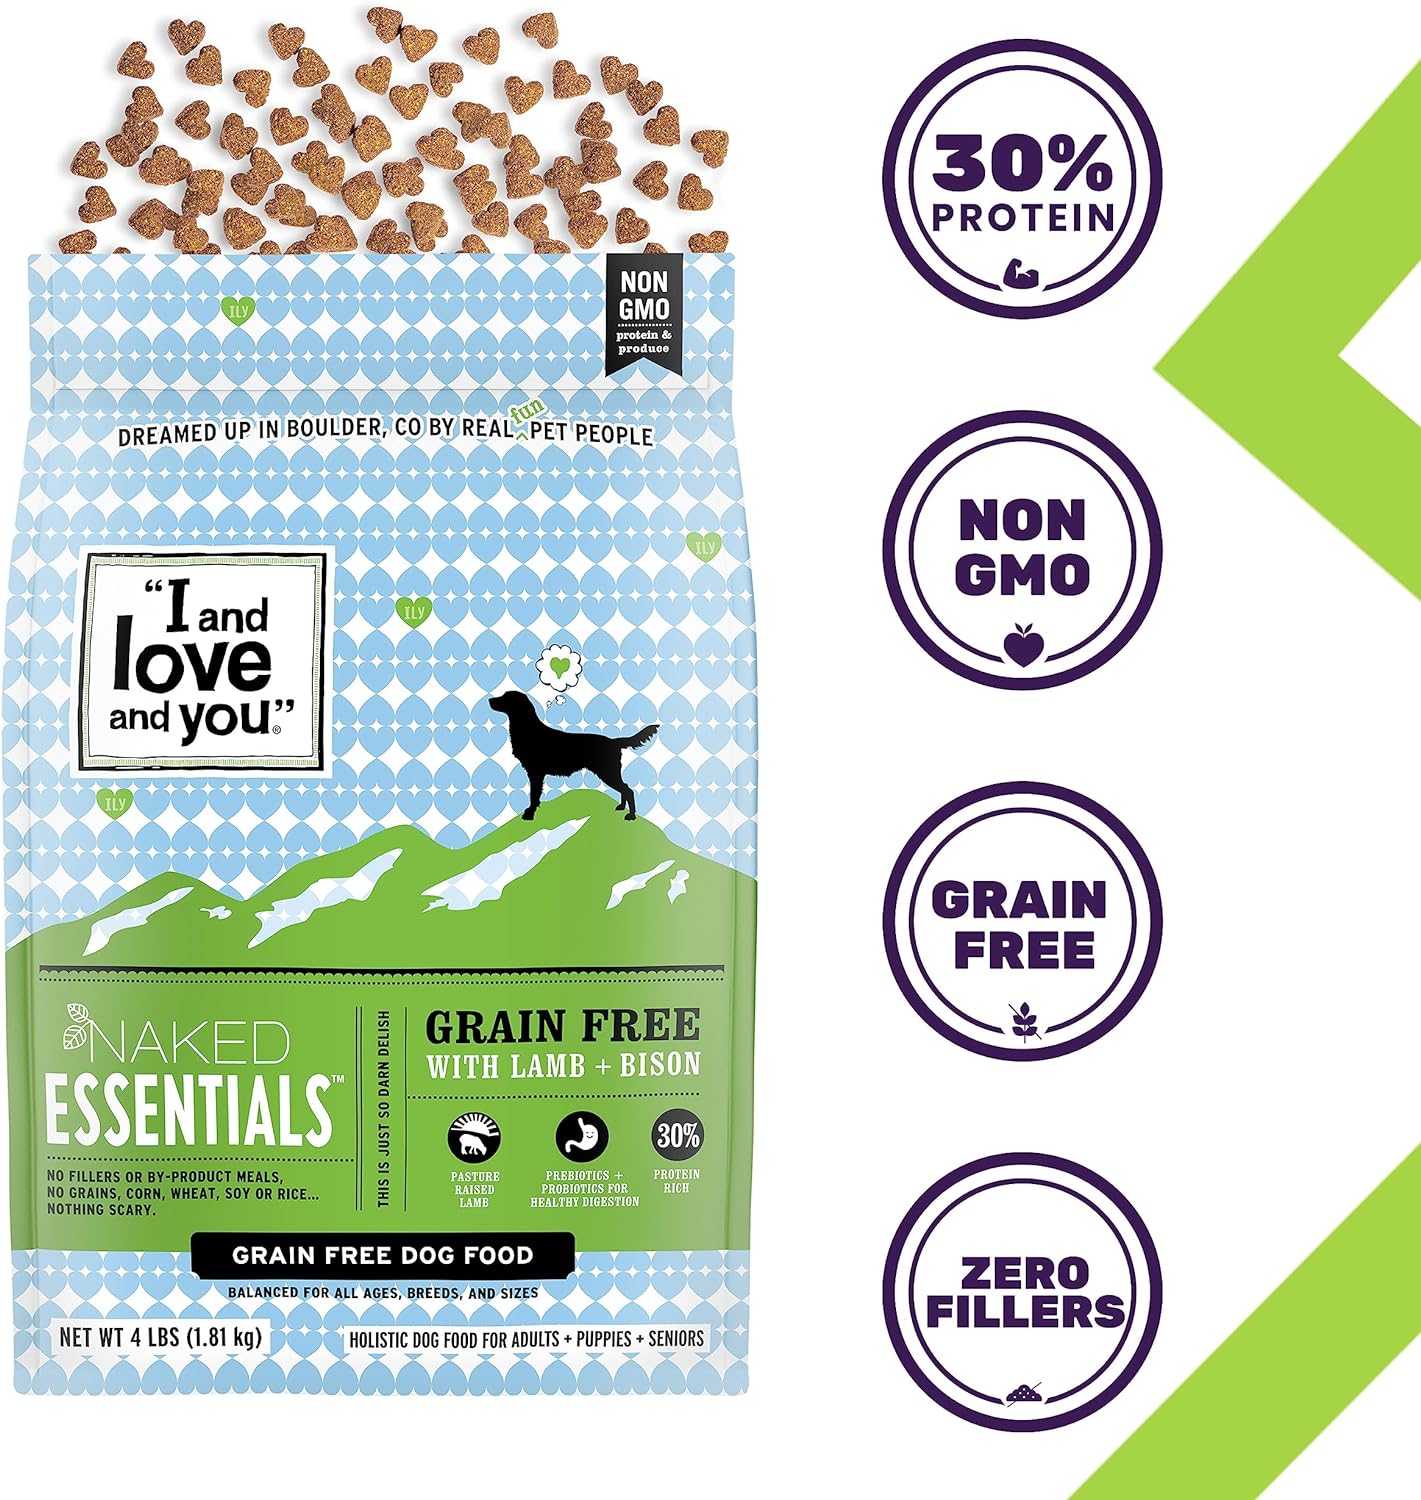 I and Love and You Naked Essentials Grain-Free with Lamb + Bison Dry Dog Food – Gallery Image 3